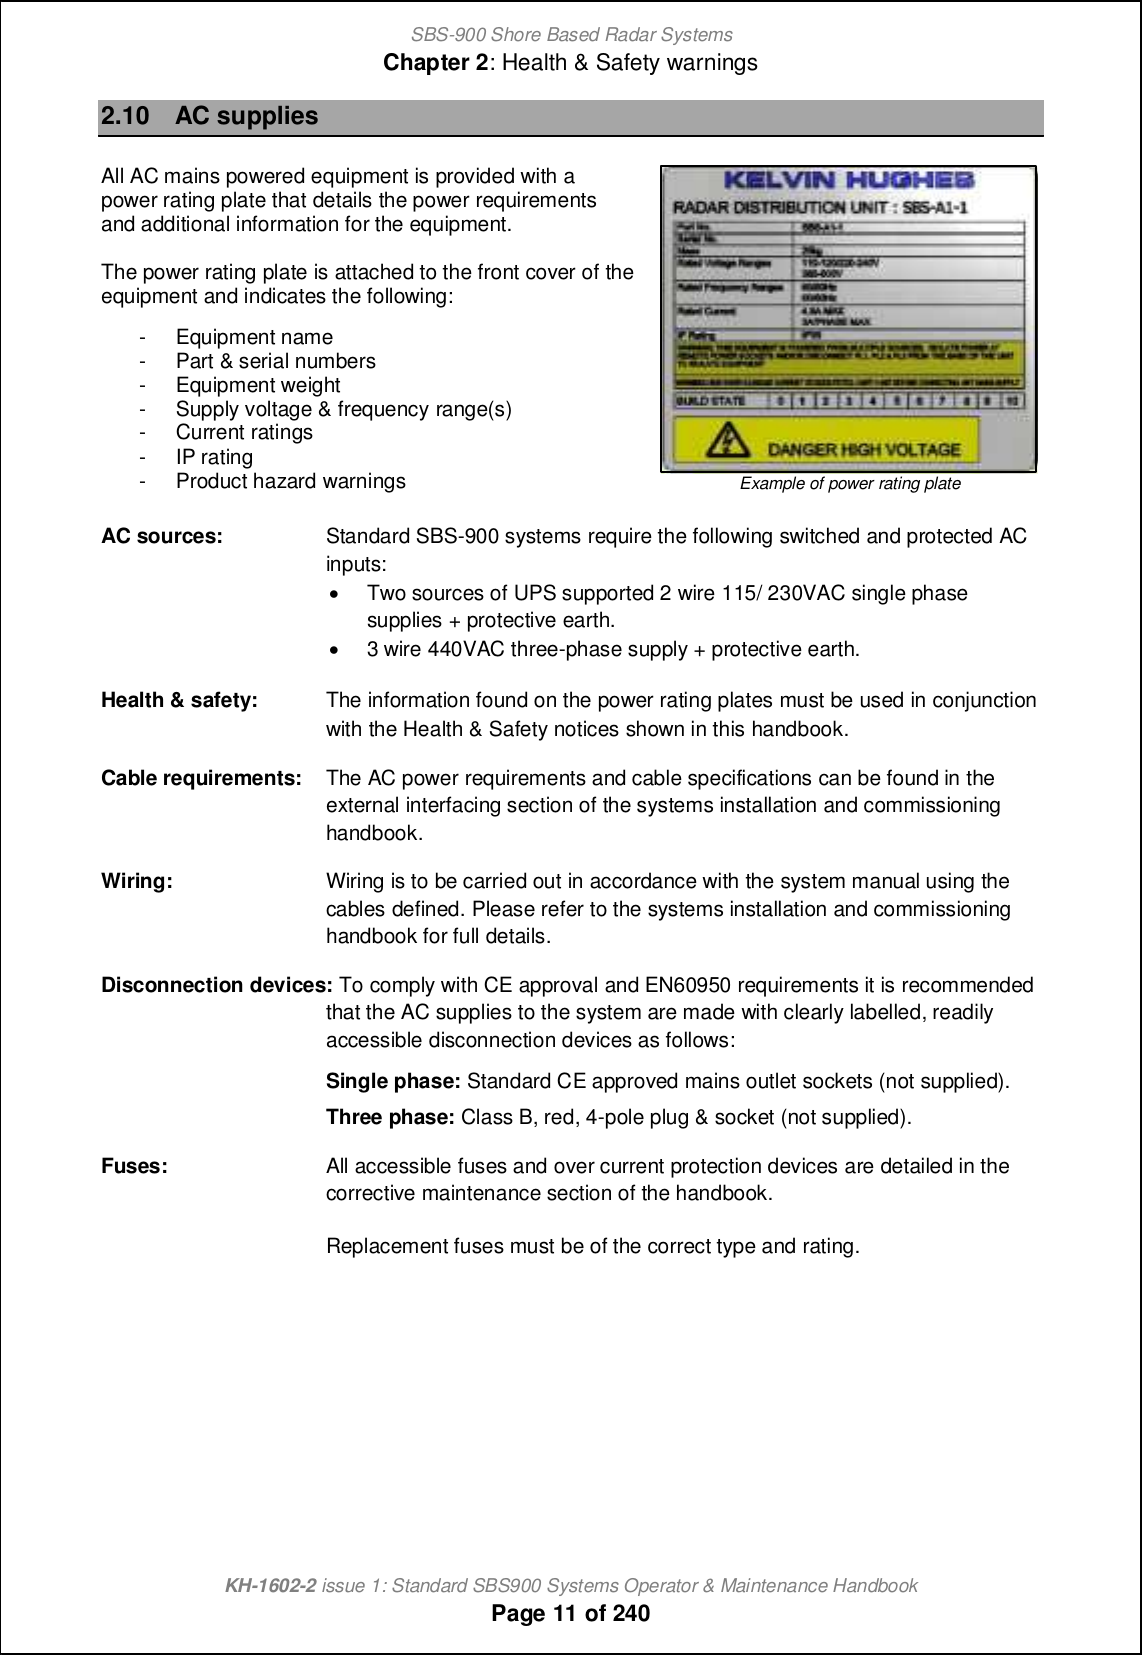 SBS-900 Shore Based Radar SystemsChapter 2: Health &amp; Safety warningsKH-1602-2 issue 1: Standard SBS900 Systems Operator &amp; Maintenance HandbookPage 11 of 2402.10 AC suppliesAll AC mains powered equipment is provided with apower rating plate that details the power requirementsand additional information for the equipment.The power rating plate is attached to the front cover of theequipment and indicates the following:- Equipment name- Part &amp; serial numbers- Equipment weight- Supply voltage &amp; frequency range(s)- Current ratings- IP rating- Product hazard warnings Example of power rating plateAC sources: Standard SBS-900 systems require the following switched and protected ACinputs:&apos;Two sources of UPS supported 2 wire 115/ 230VAC single phasesupplies + protective earth.&apos;3 wire 440VAC three-phase supply + protective earth.Health &amp; safety: The information found on the power rating plates must be used in conjunctionwith the Health &amp; Safety notices shown in this handbook.Cable requirements: The AC power requirements and cable specifications can be found in theexternal interfacing section of the systems installation and commissioninghandbook.Wiring: Wiring is to be carried out in accordance with the system manual using thecables defined. Please refer to the systems installation and commissioninghandbook for full details.Disconnection devices: To comply with CE approval and EN60950 requirements it is recommendedthat the AC supplies to the system are made with clearly labelled, readilyaccessible disconnection devices as follows:Single phase: Standard CE approved mains outlet sockets (not supplied).Three phase: Class B, red, 4-pole plug &amp; socket (not supplied).Fuses: All accessible fuses and over current protection devices are detailed in thecorrective maintenance section of the handbook.Replacement fuses must be of the correct type and rating.